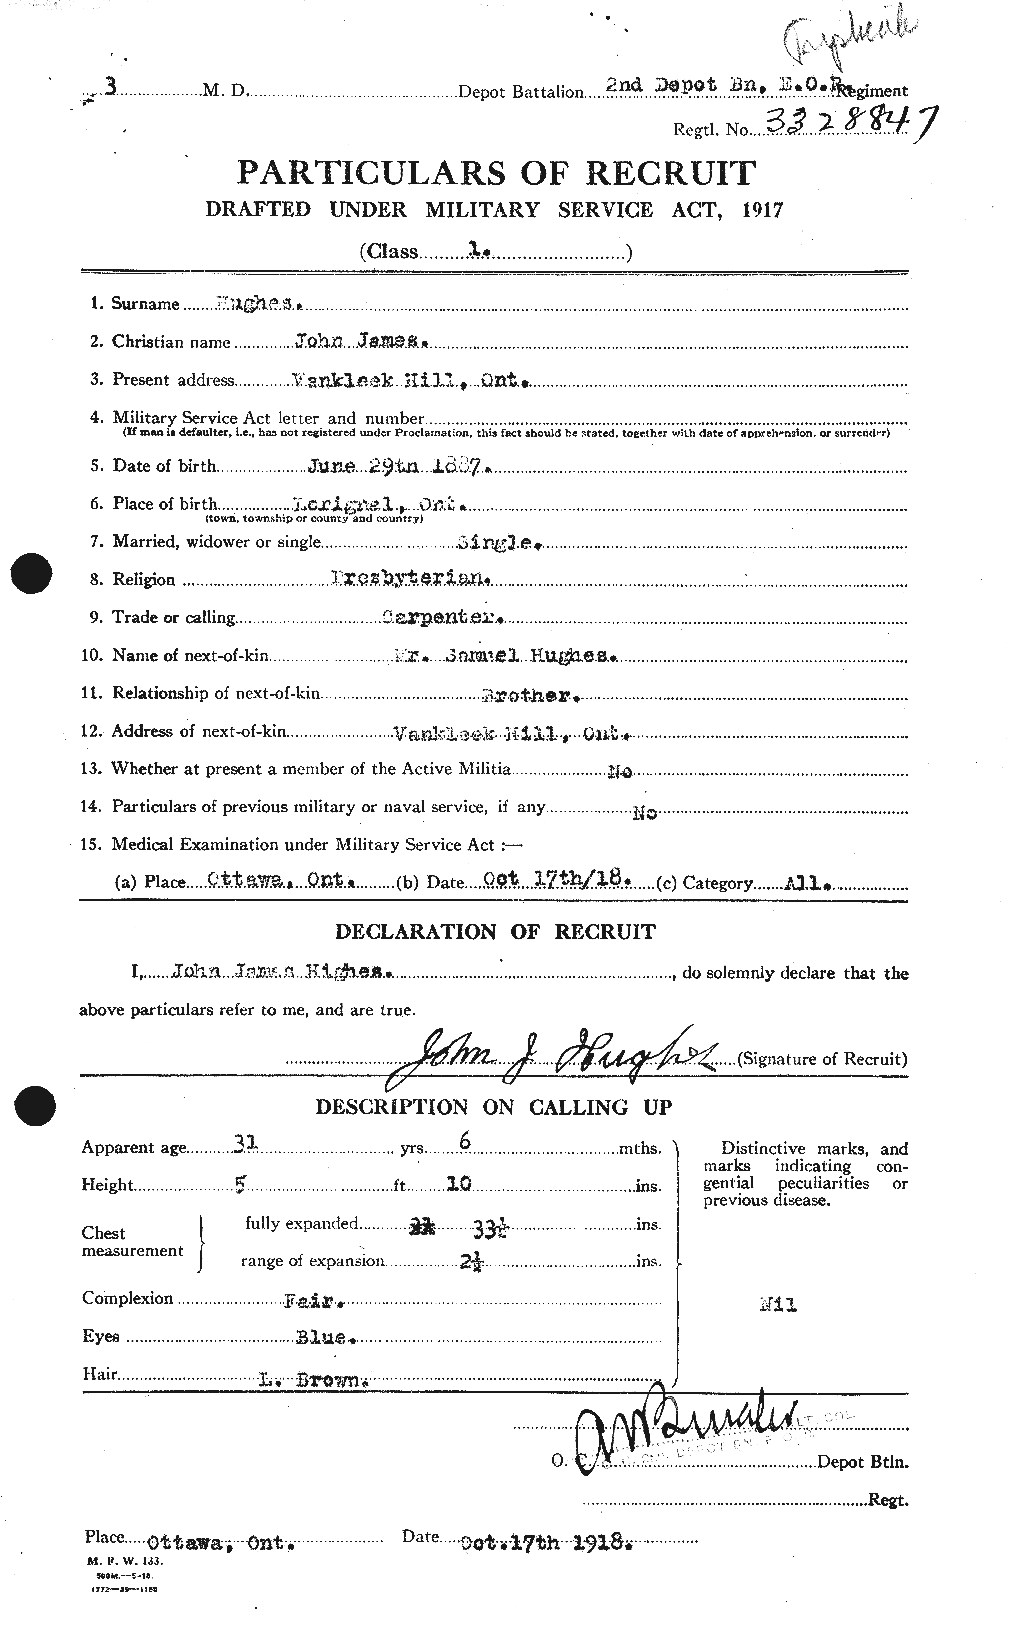 Personnel Records of the First World War - CEF 404033a